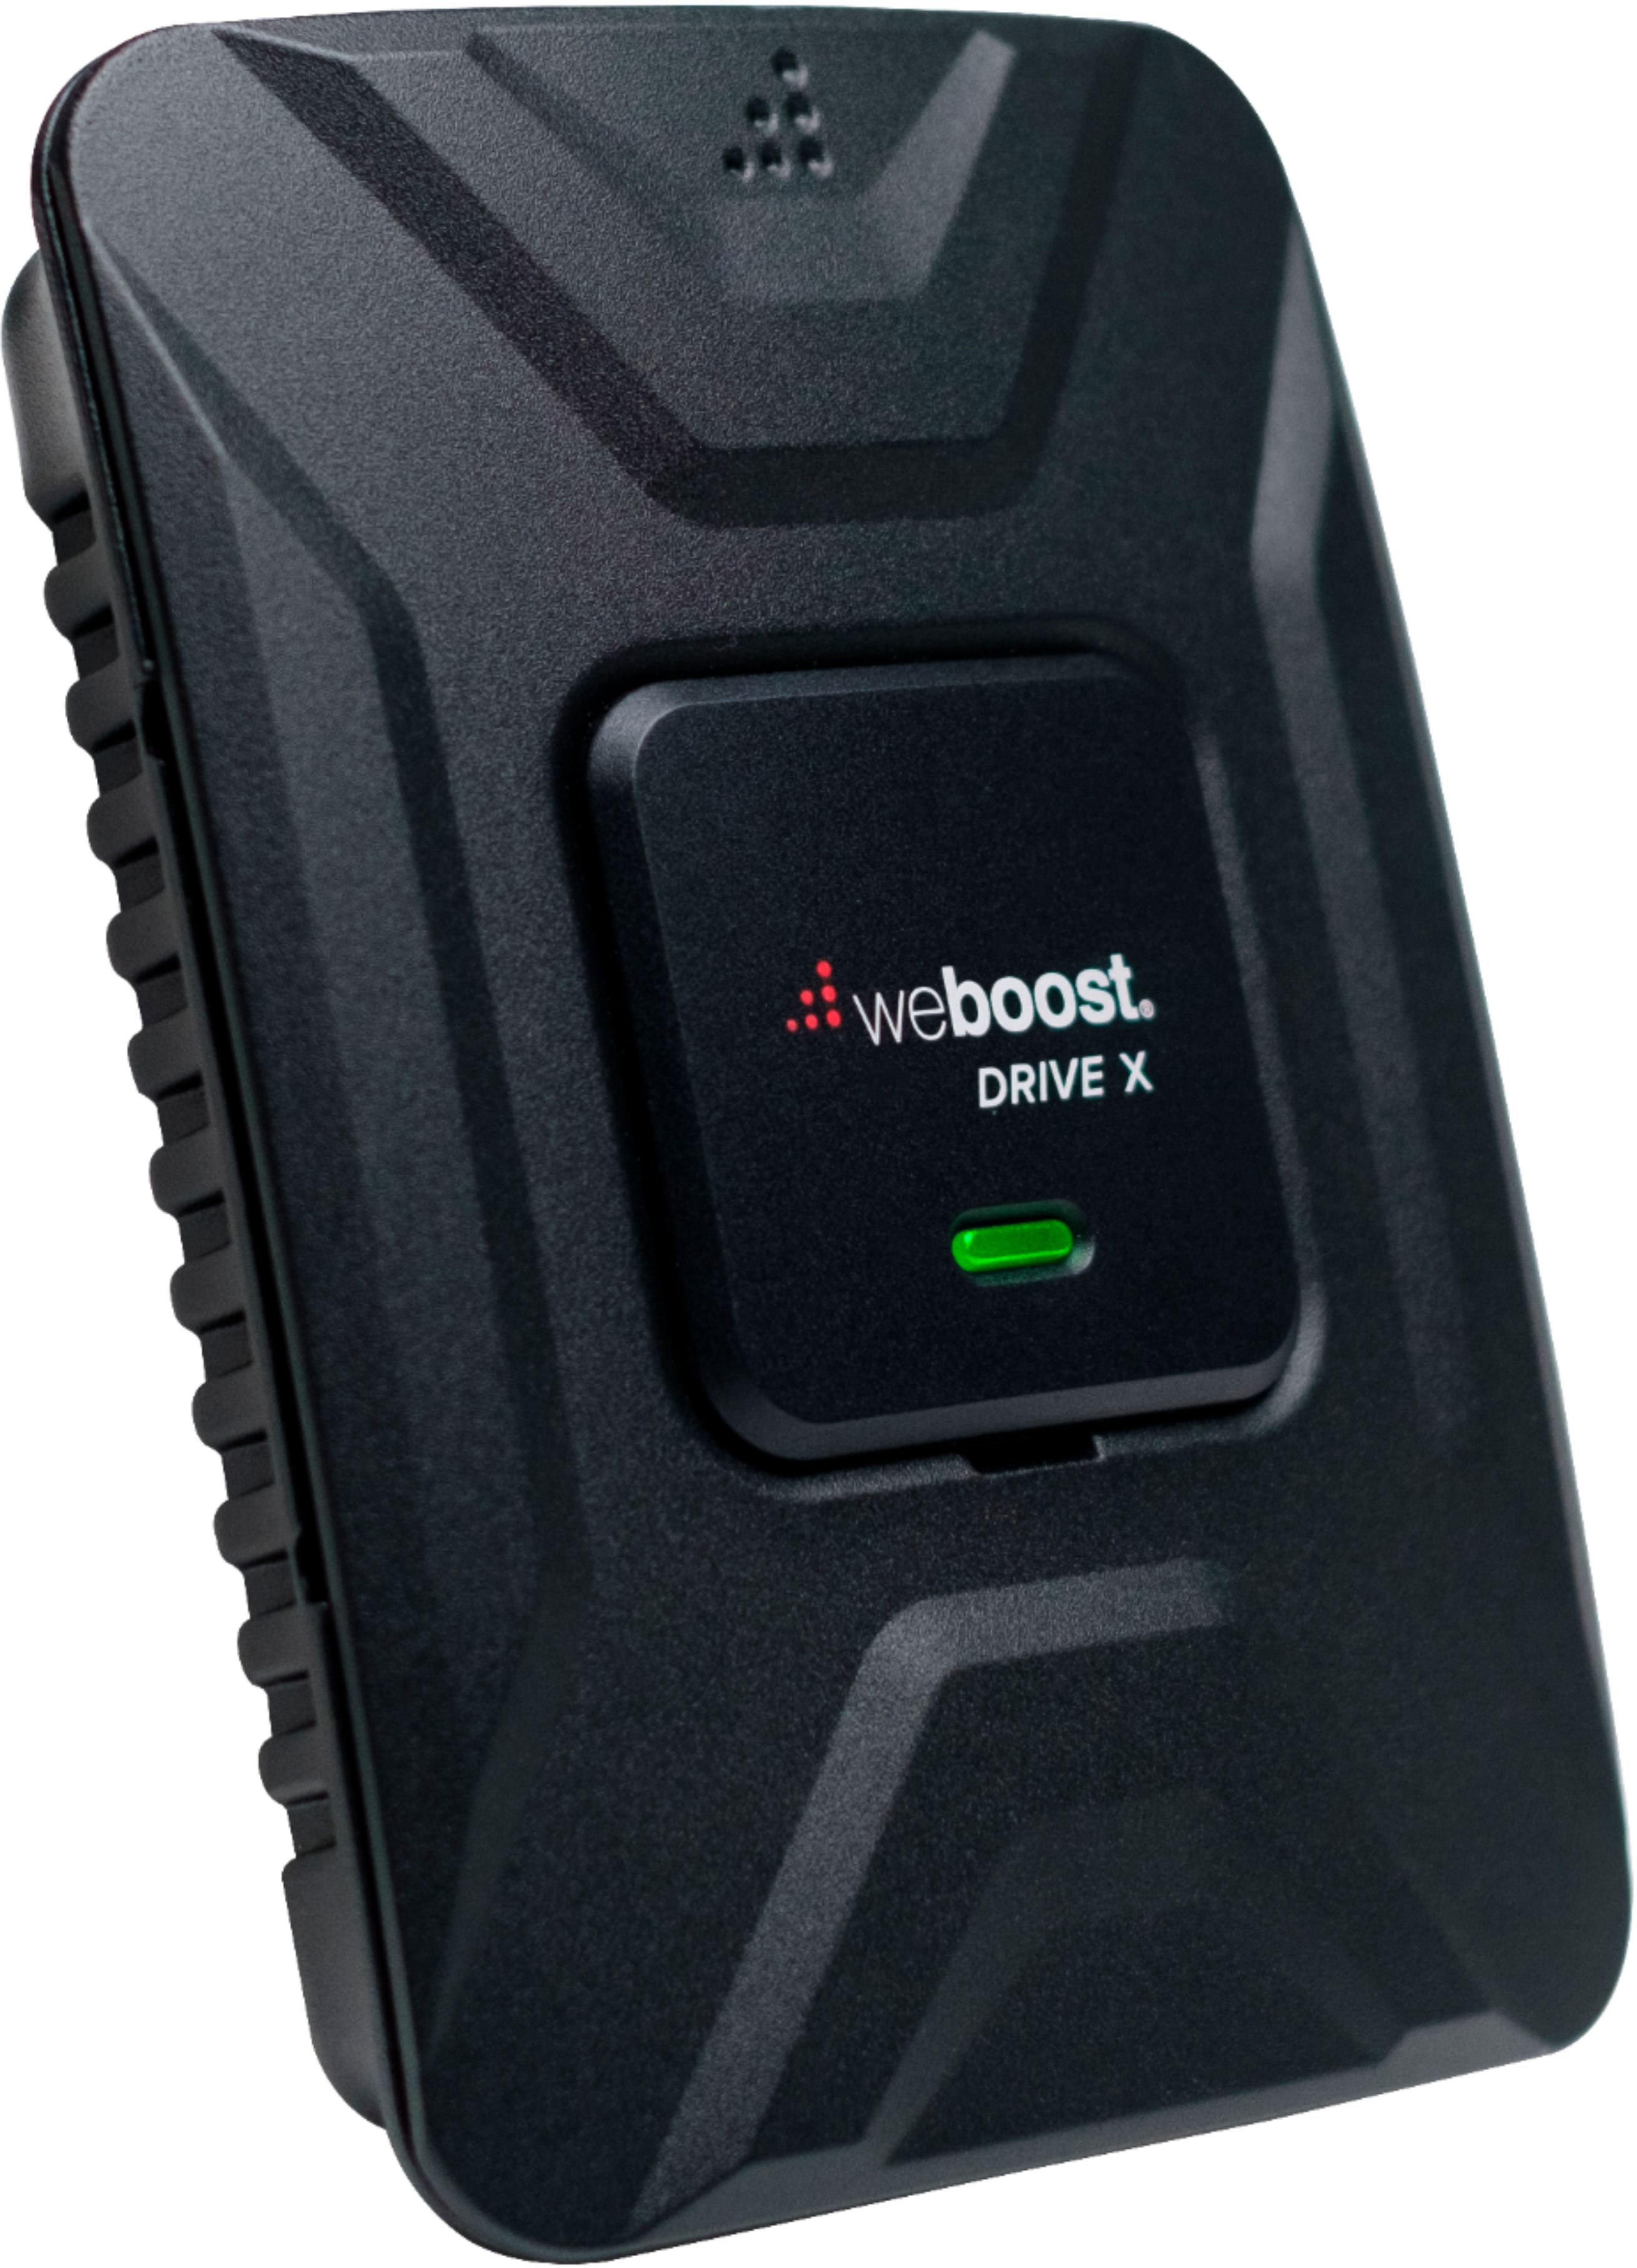 weBoost Drive X Vehicle Cell Phone Signal Booster for Car, Truck